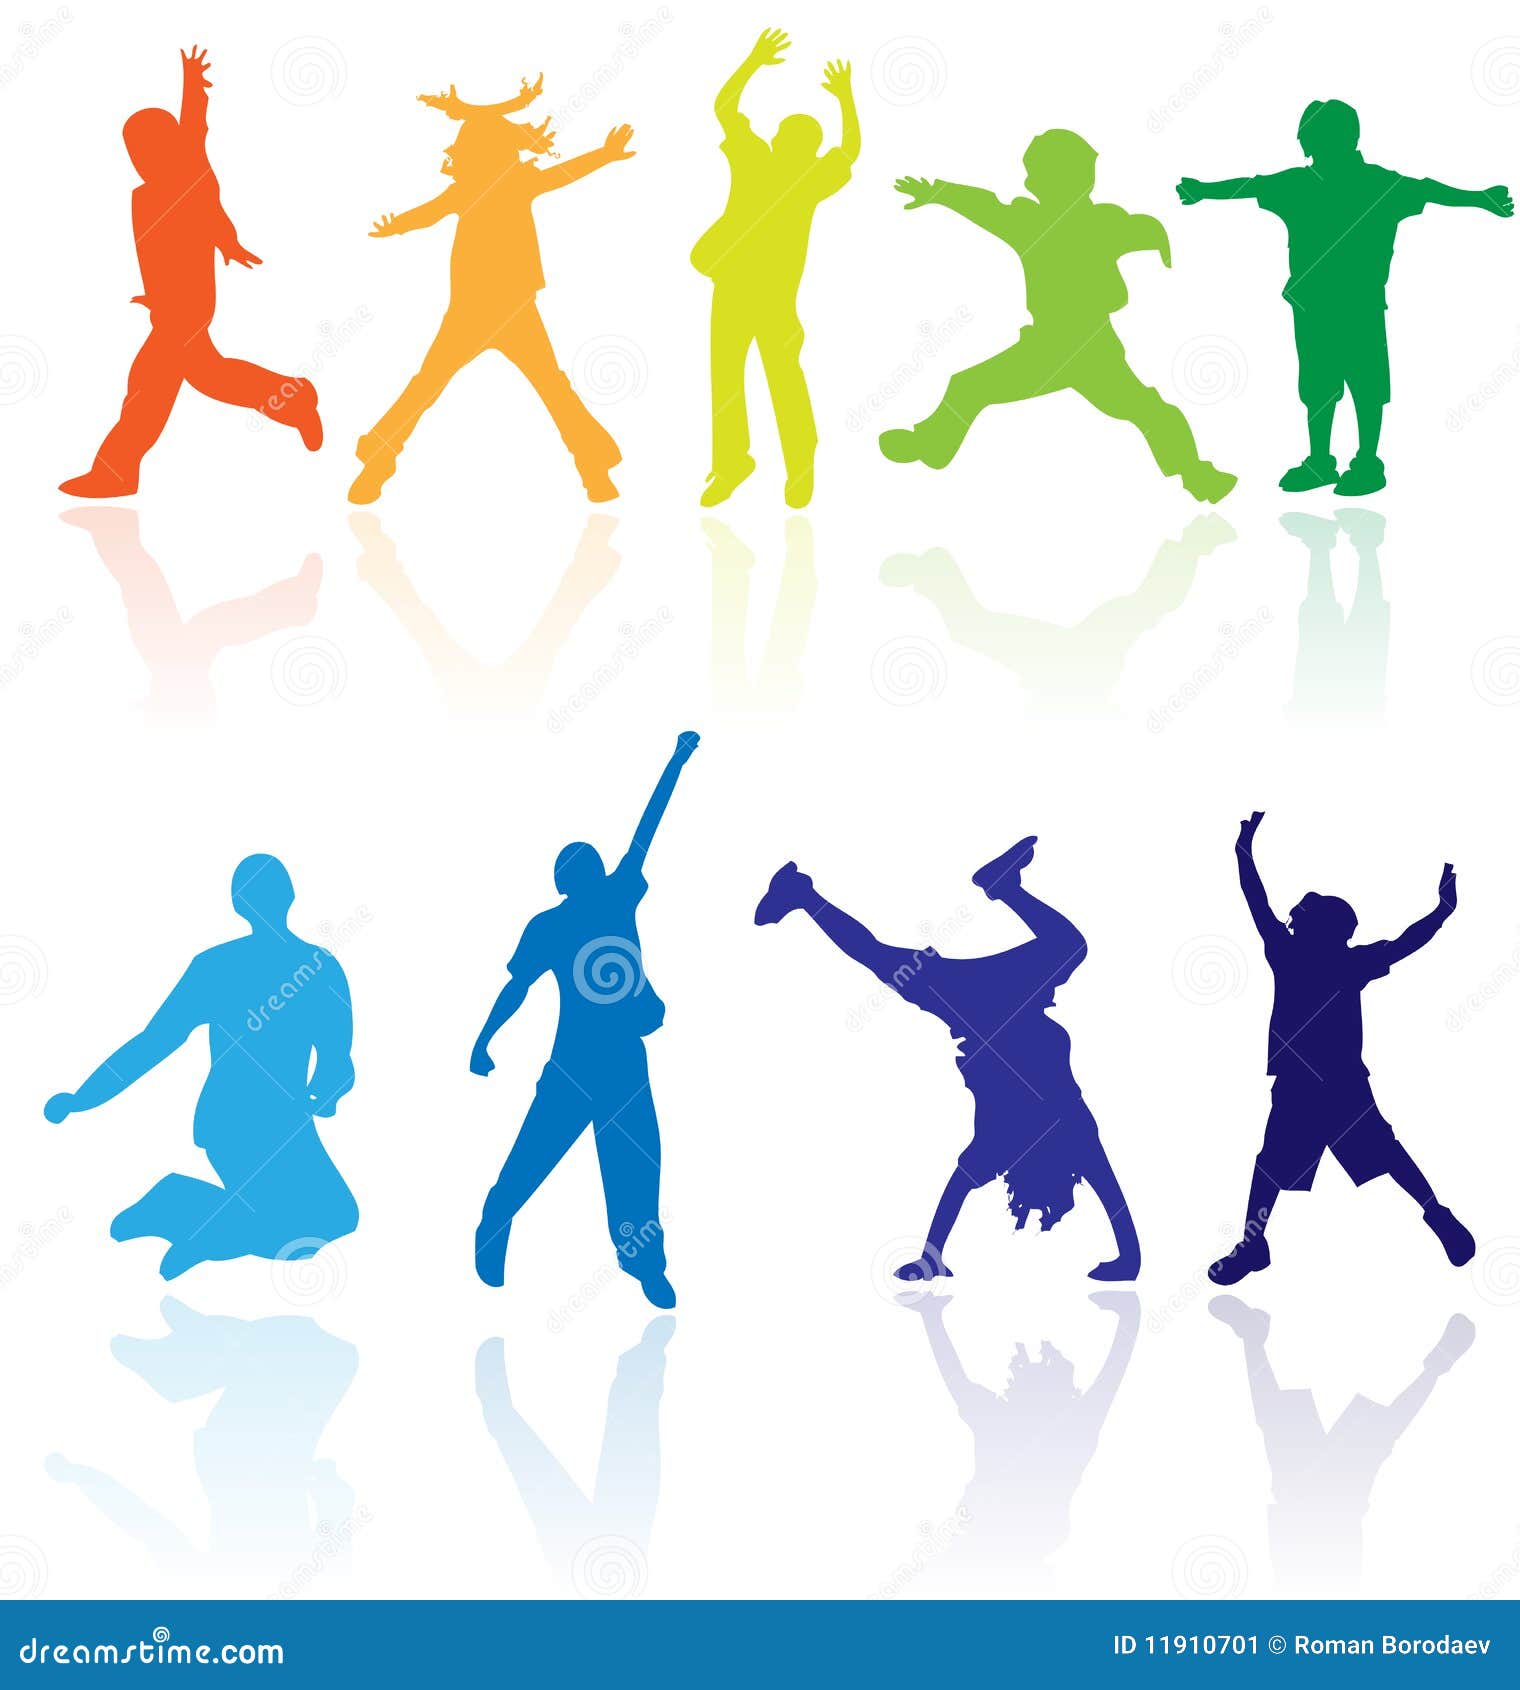 group of happy school active children silhouette jumping dancing playing running healthy kids child kid kinder action youth play